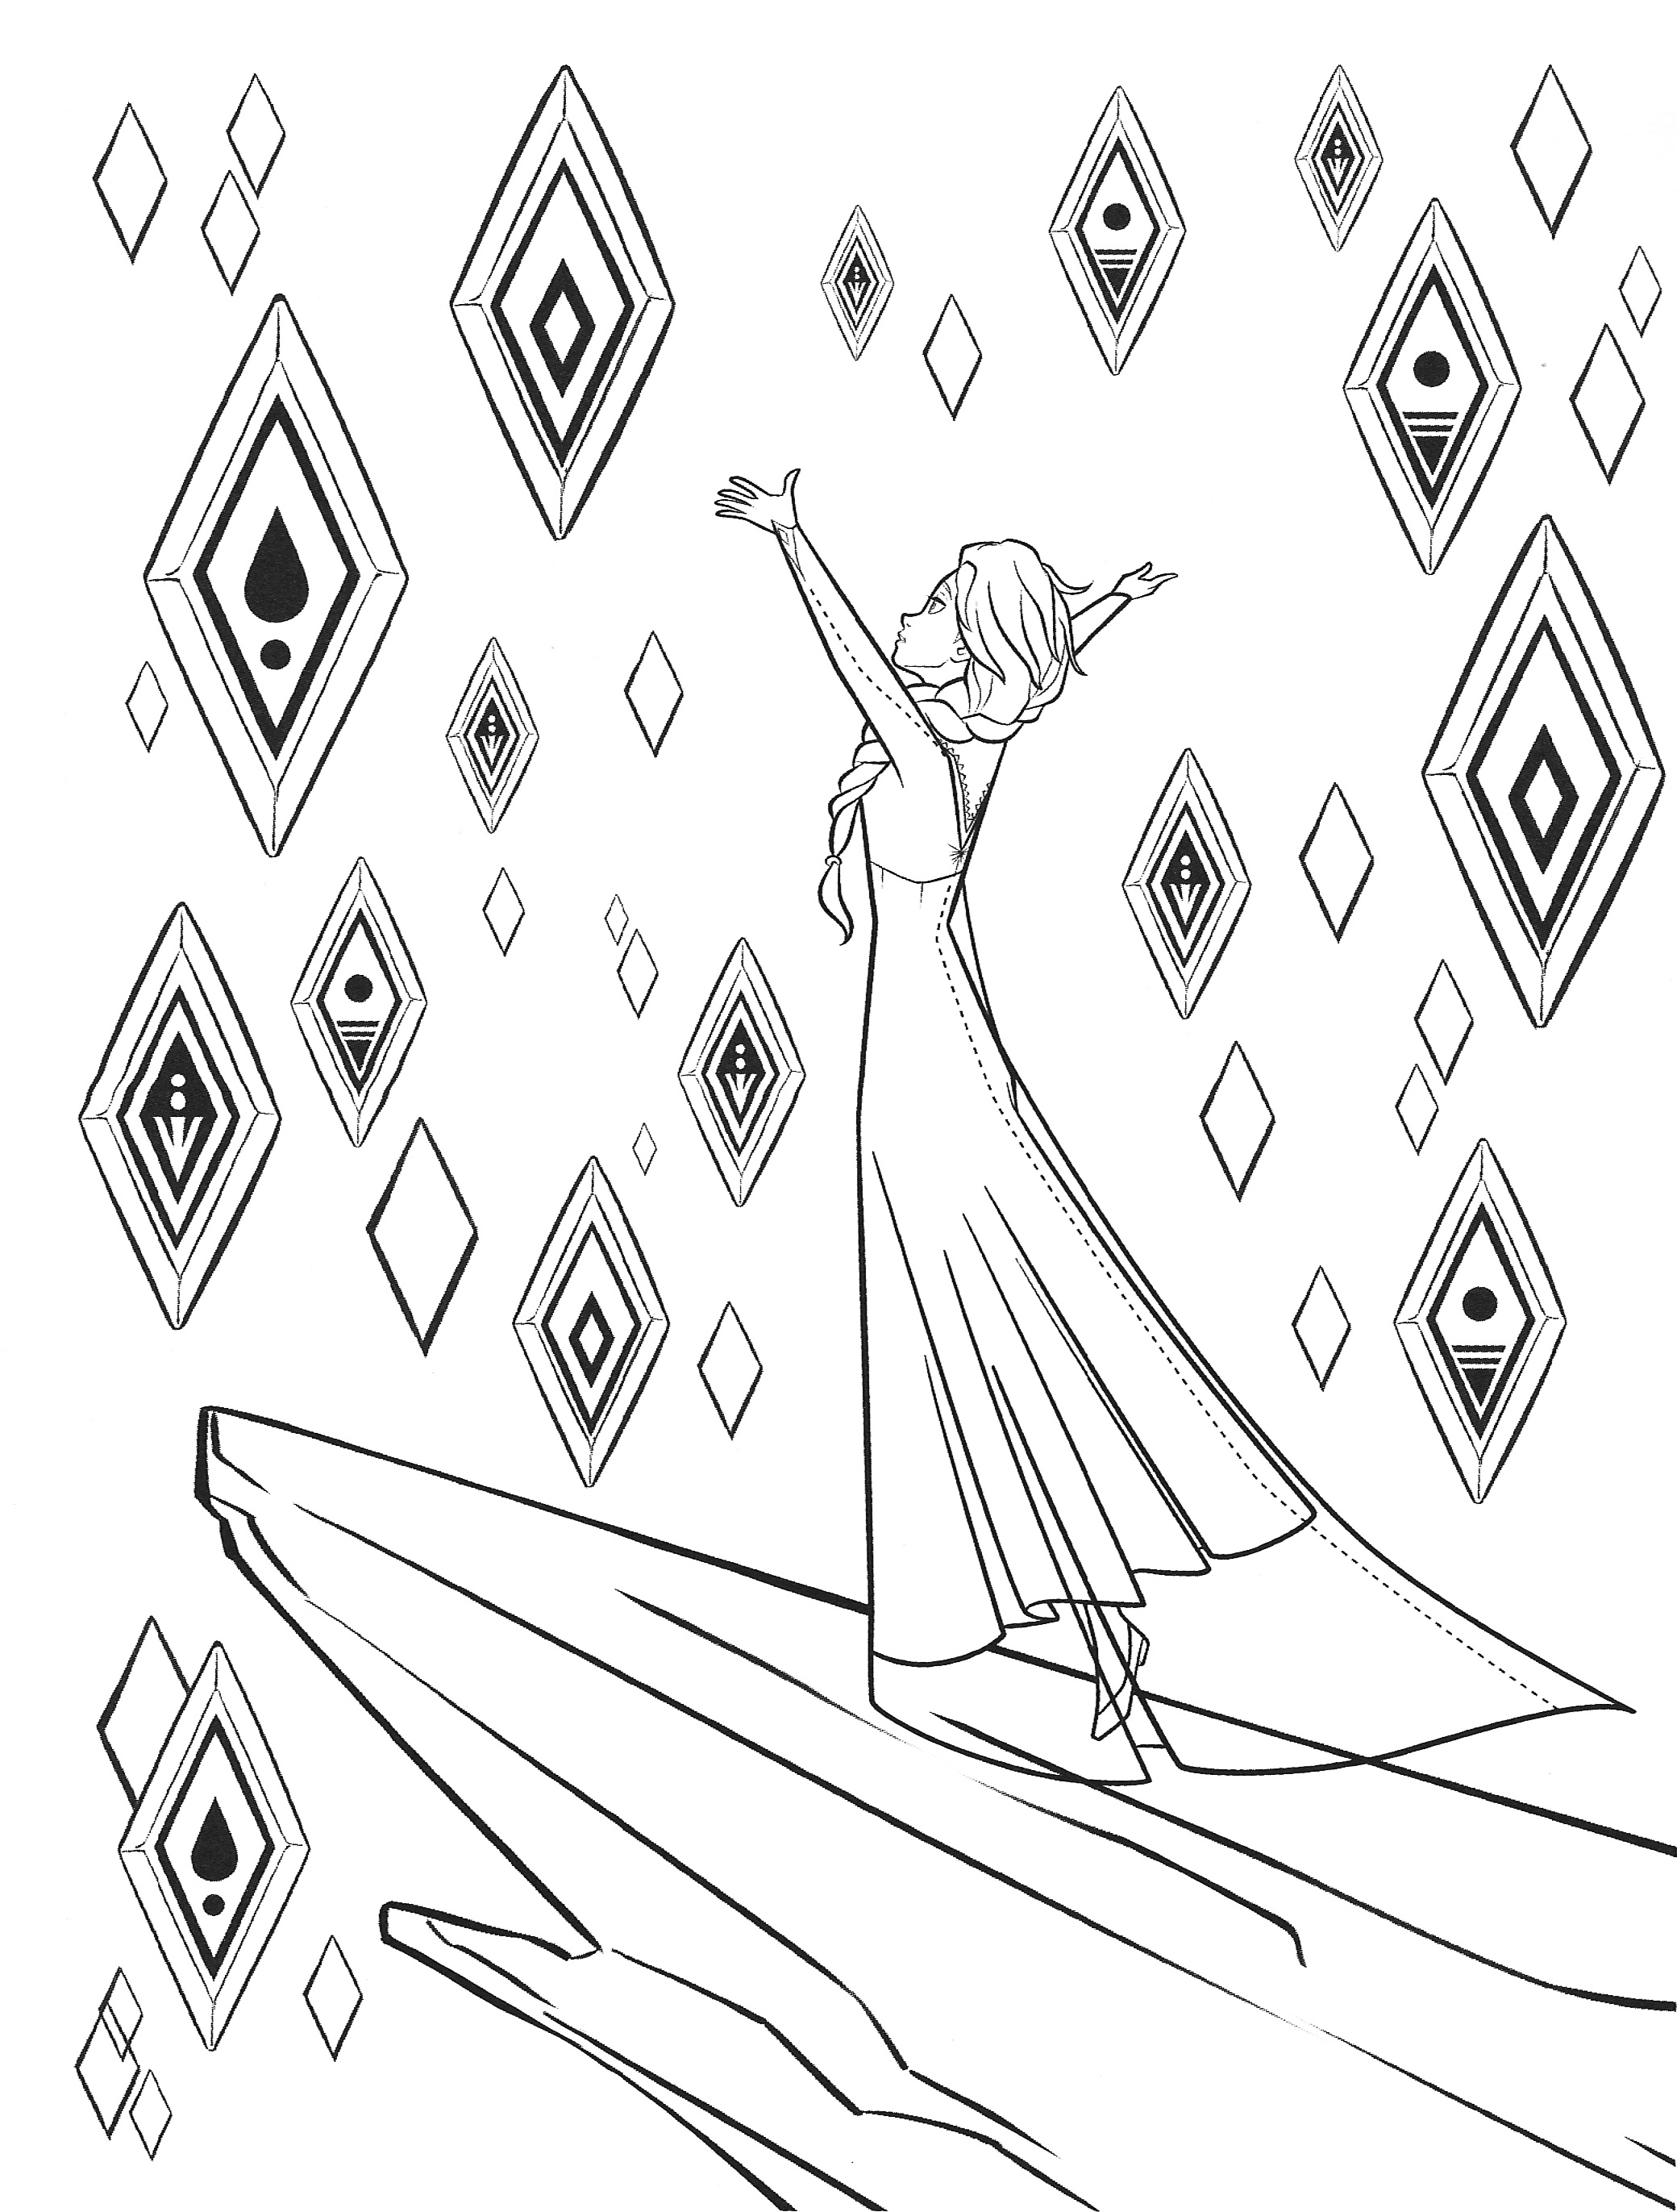 new-frozen-2-coloring-pages-with-elsa-youloveit